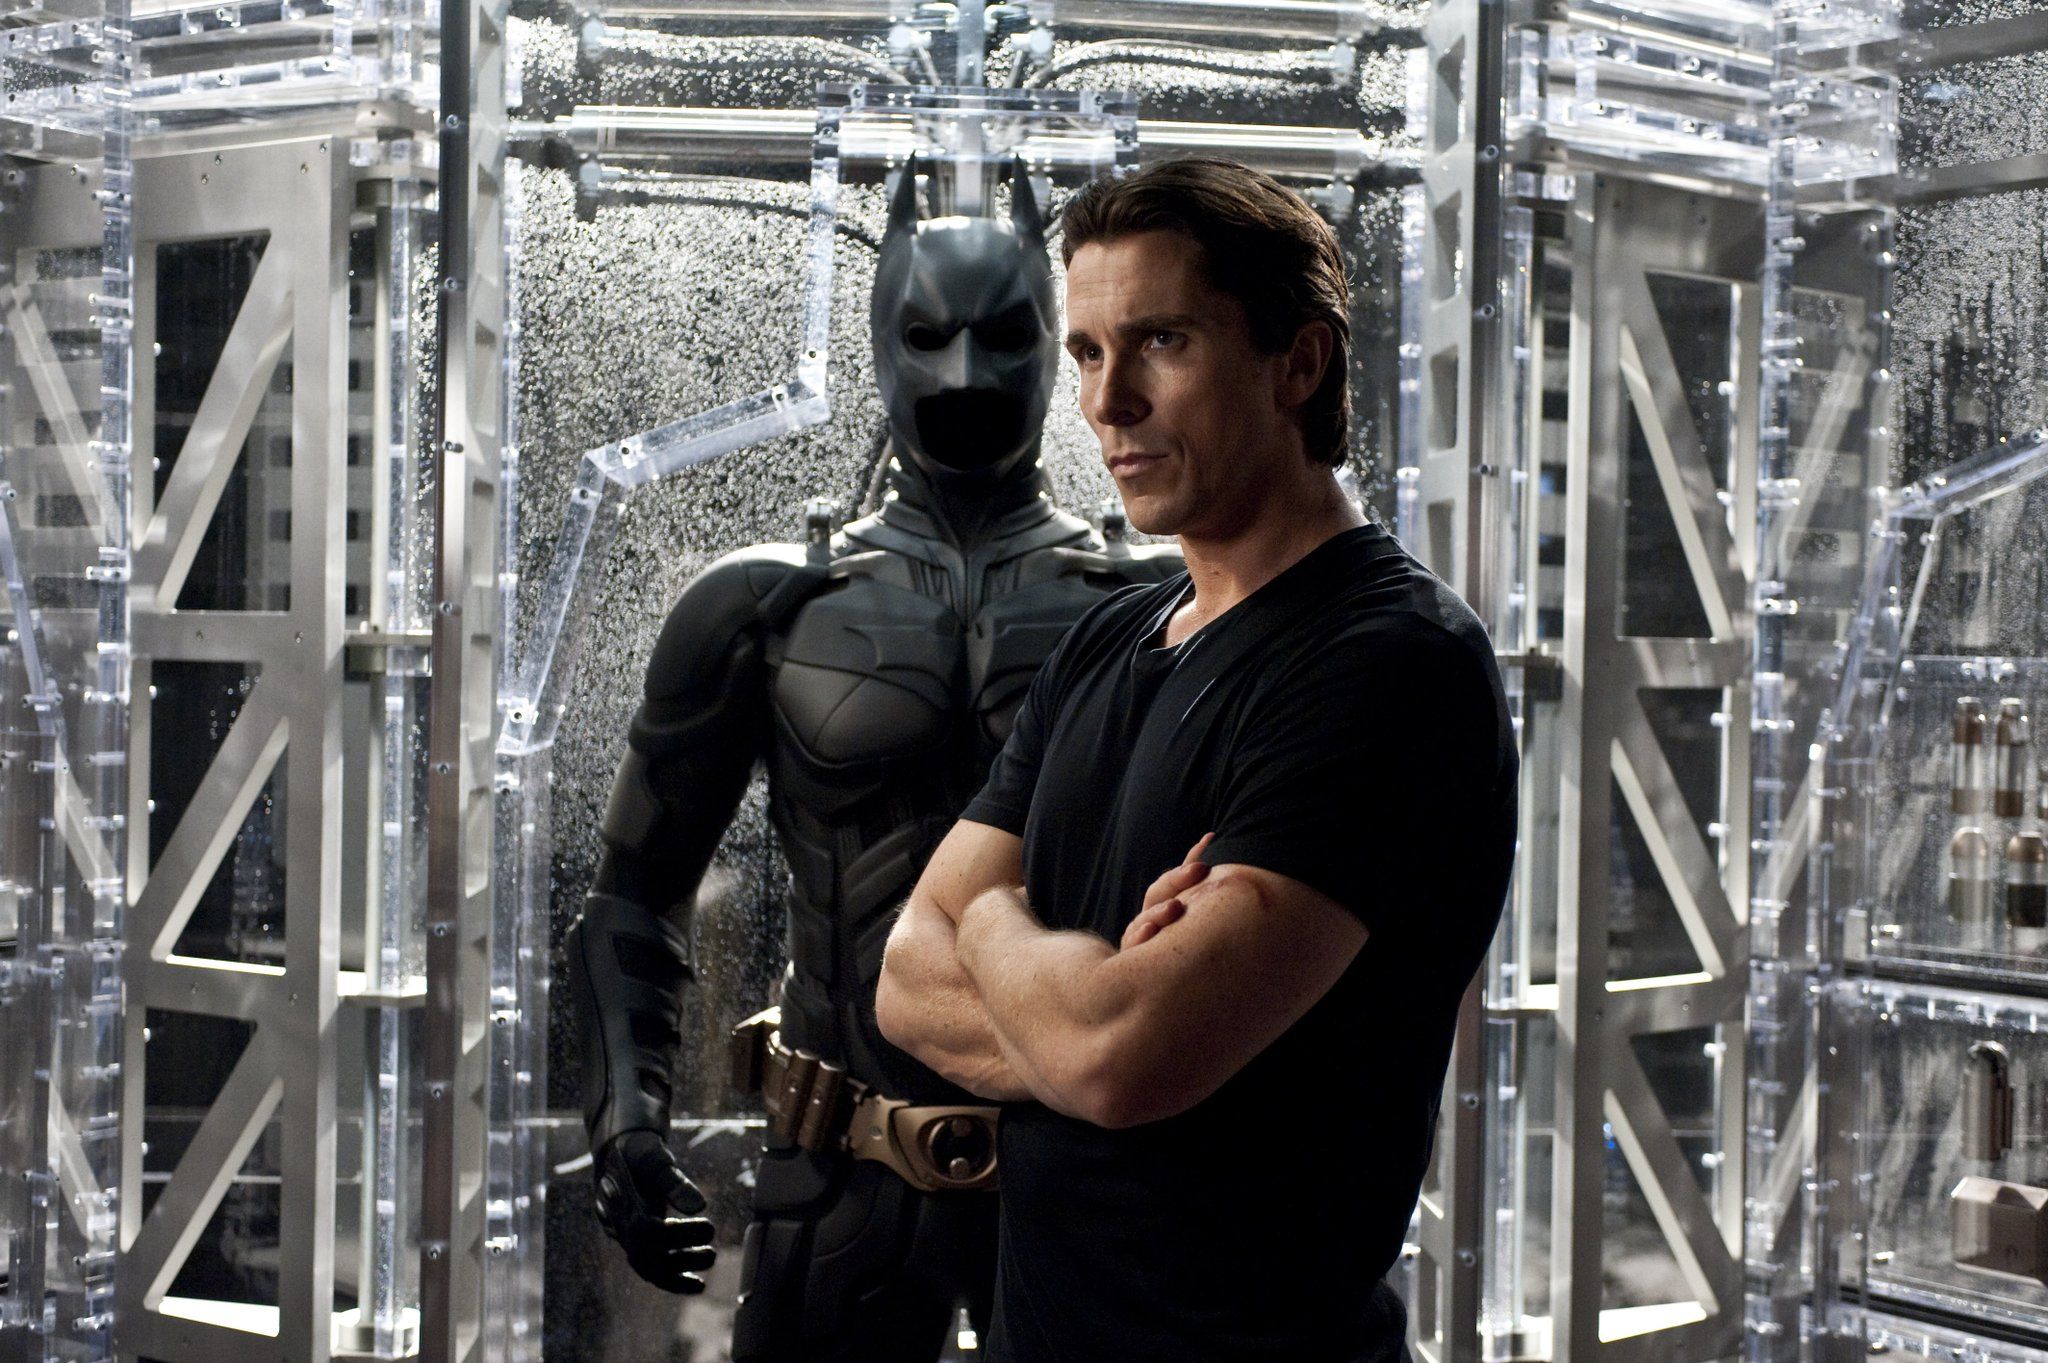 Batman star Christian Bale was considered for the Han Solo Star Wars film